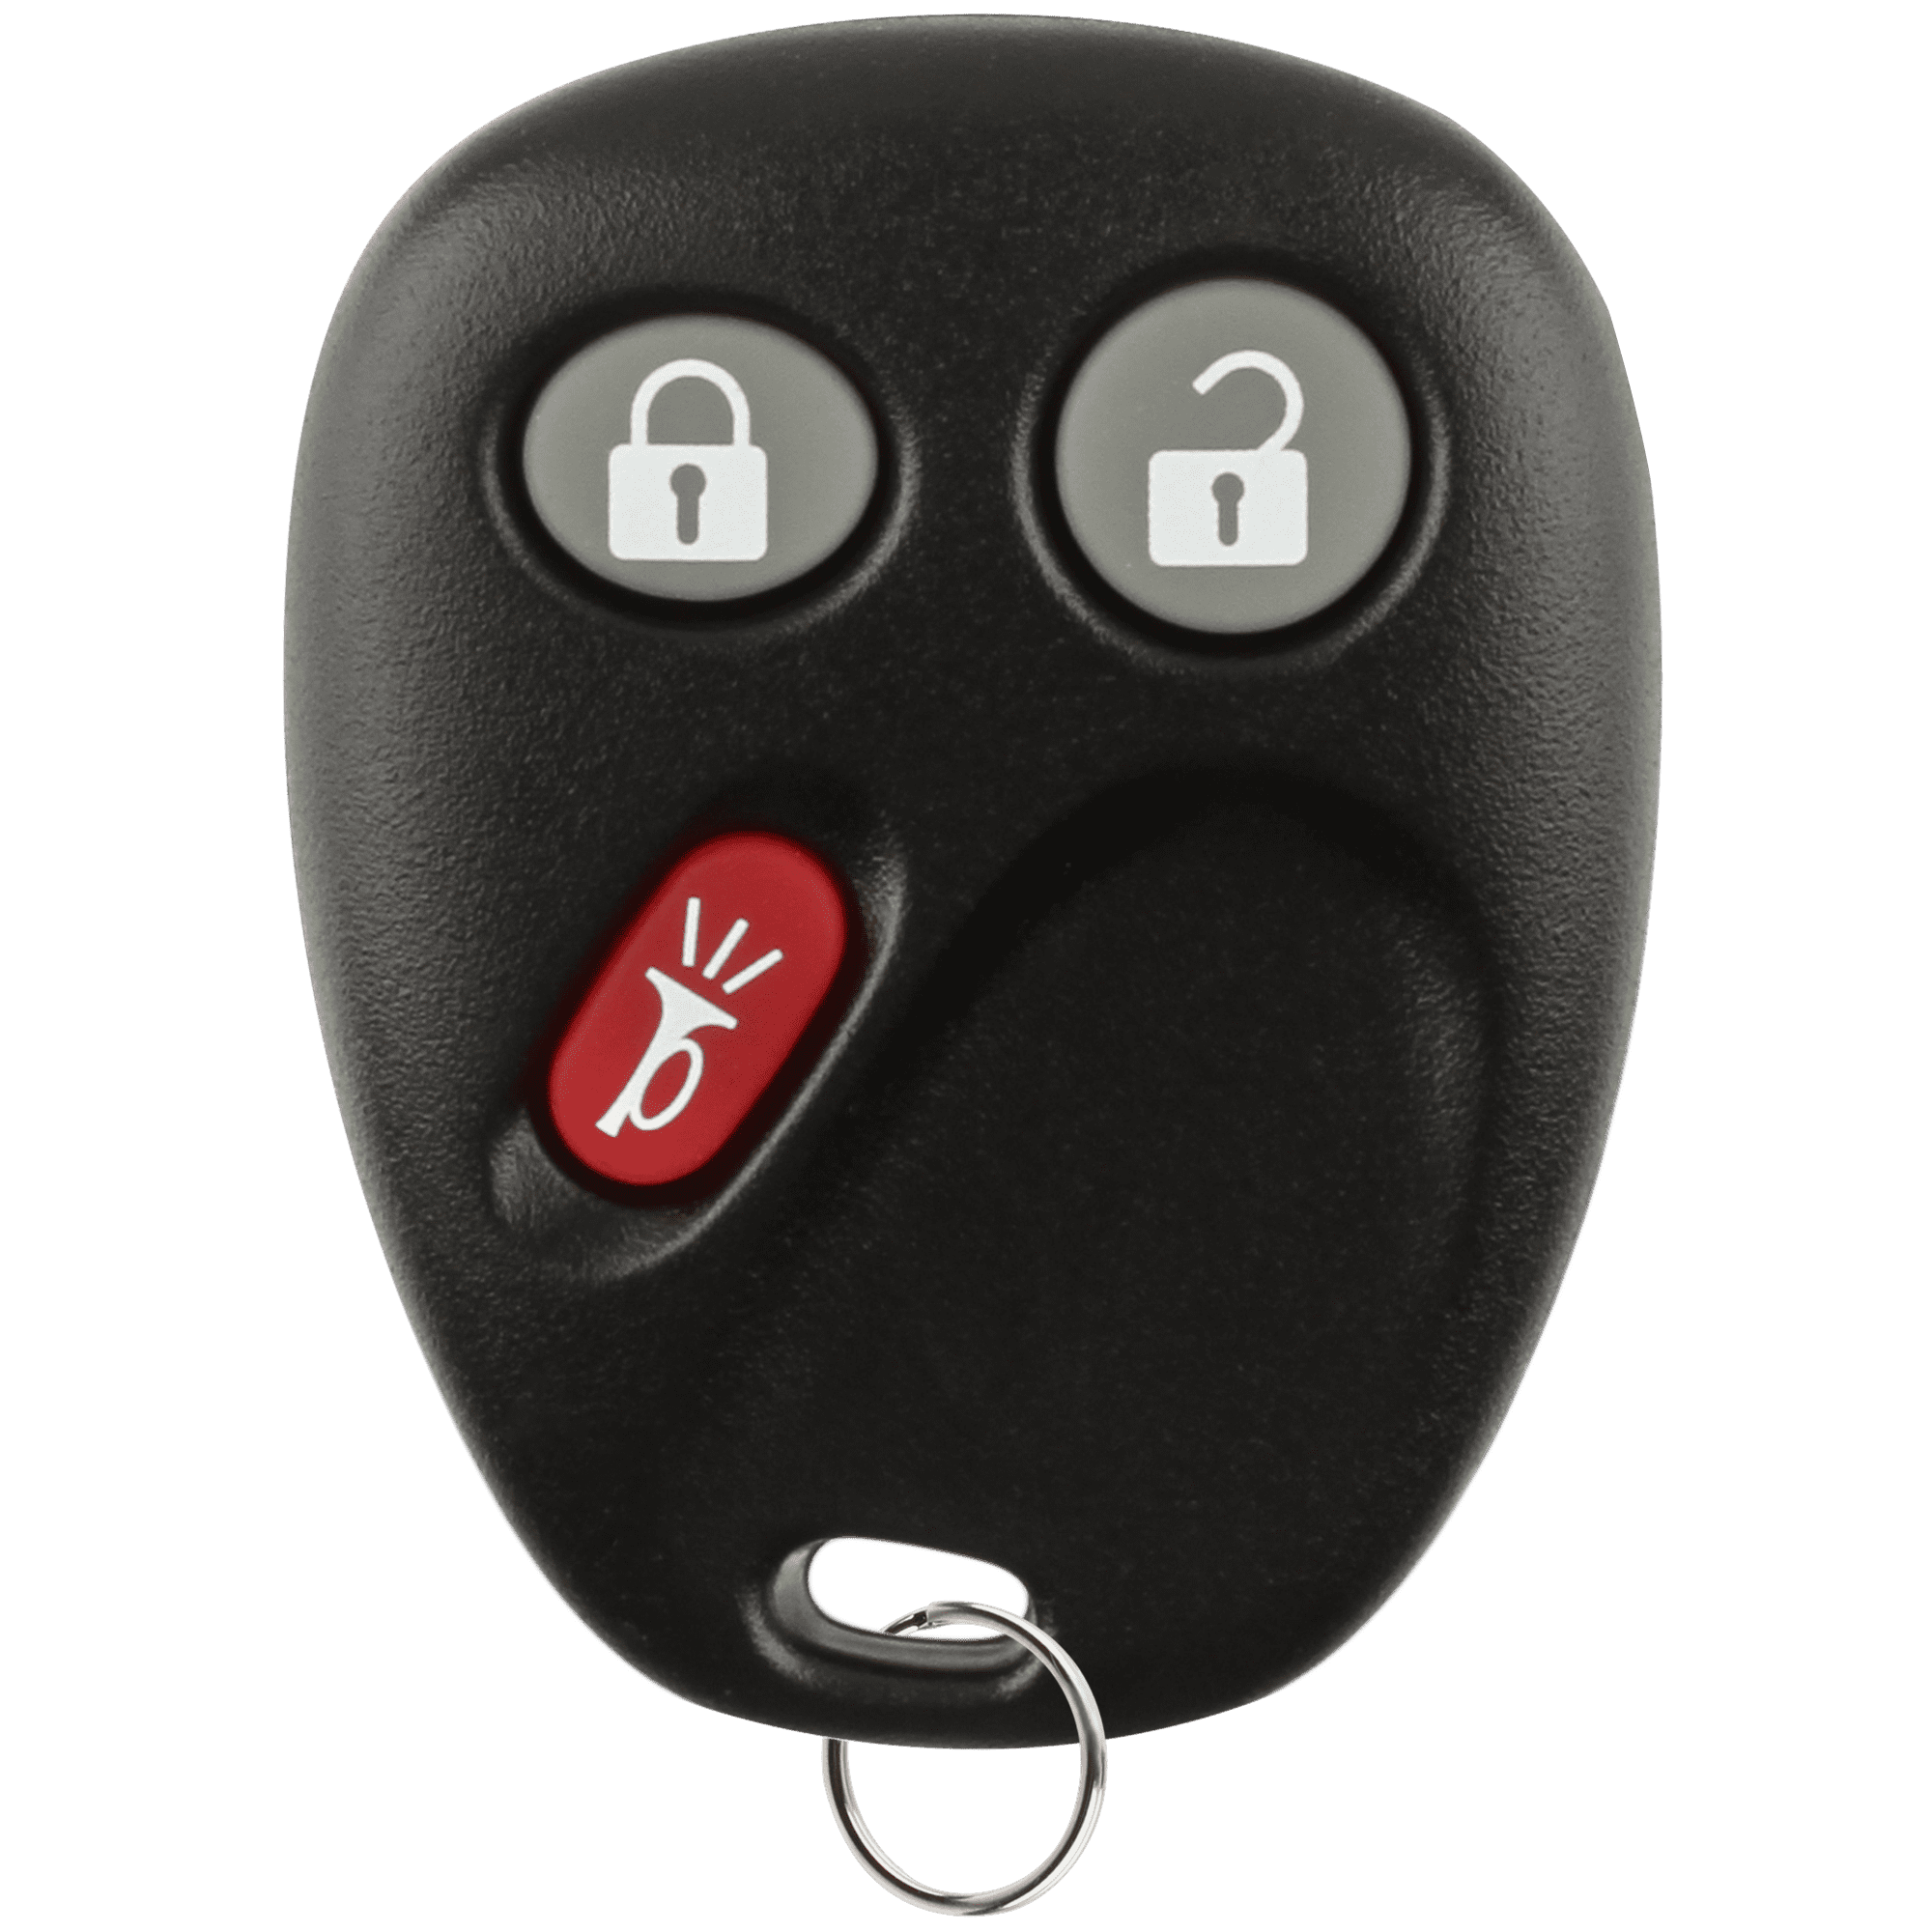 OUC60221,1Pack Car Keyless Entry Remote Control Key Fit for Chevy 2007-2014 Equinox Avalanche Silverado Escalade Tahoe Suburban GMC Yukon OUC60270 